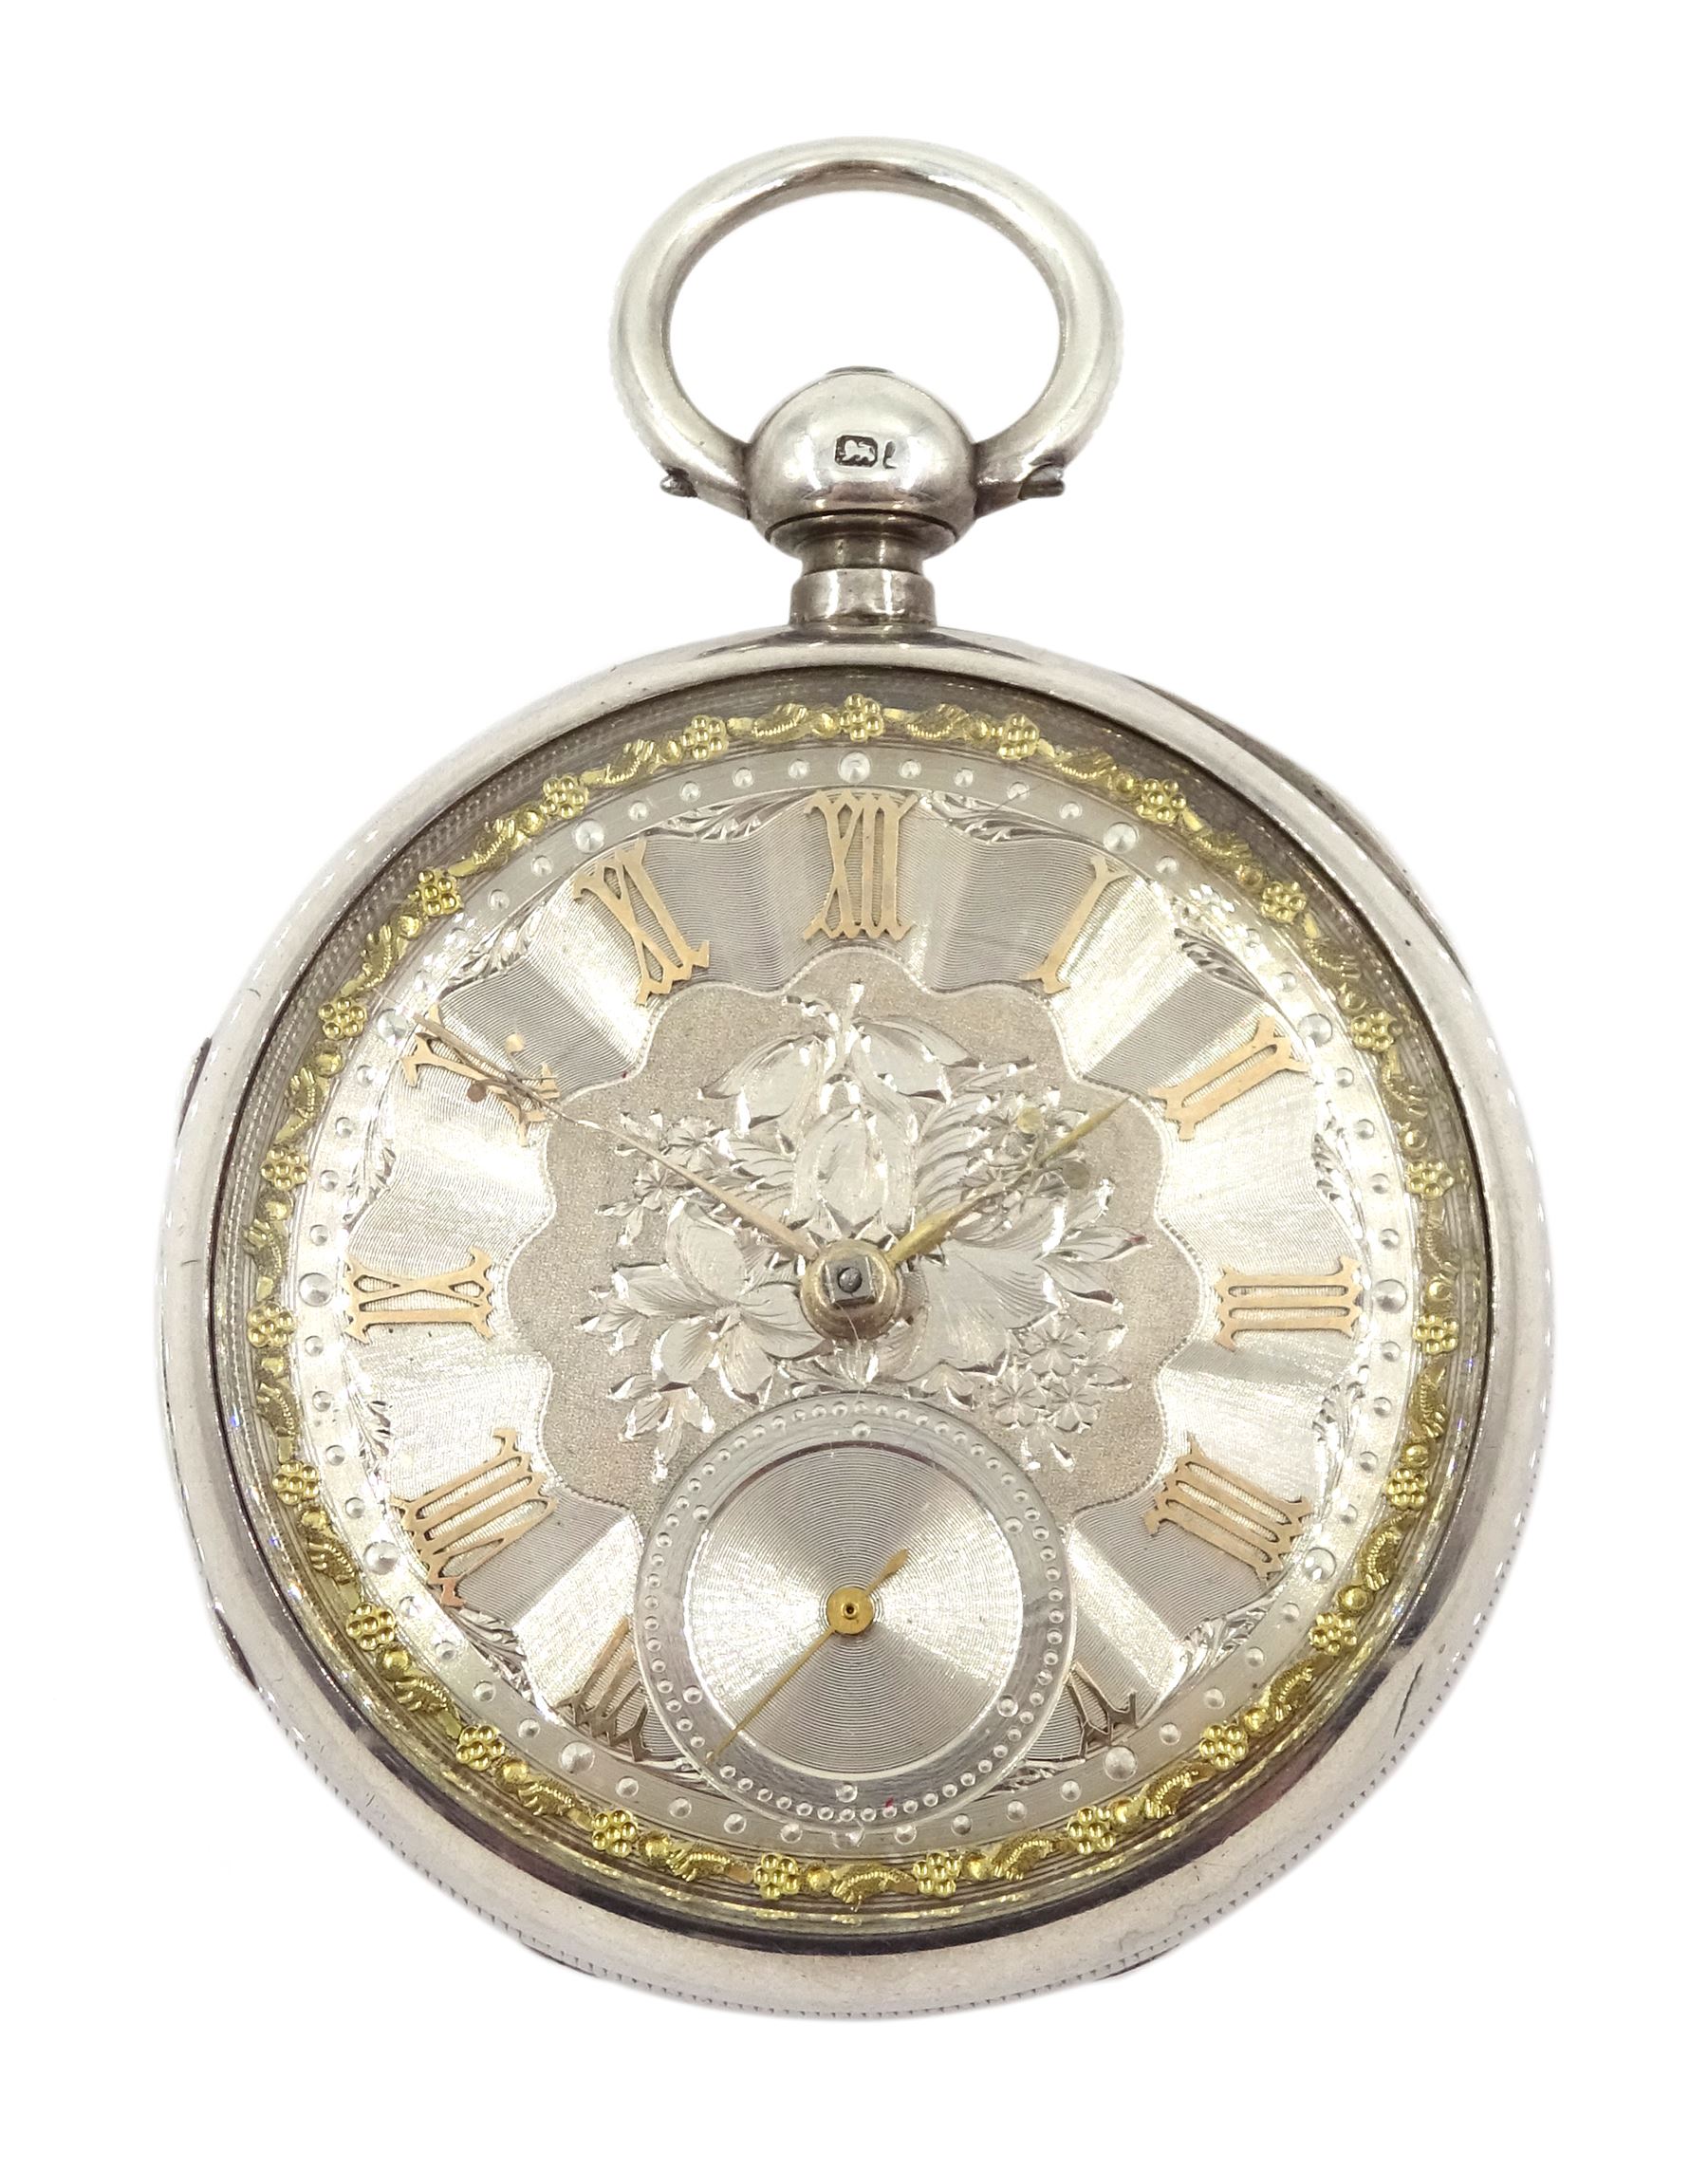 Victorian silver open face fusee pocket watch by J.Shey